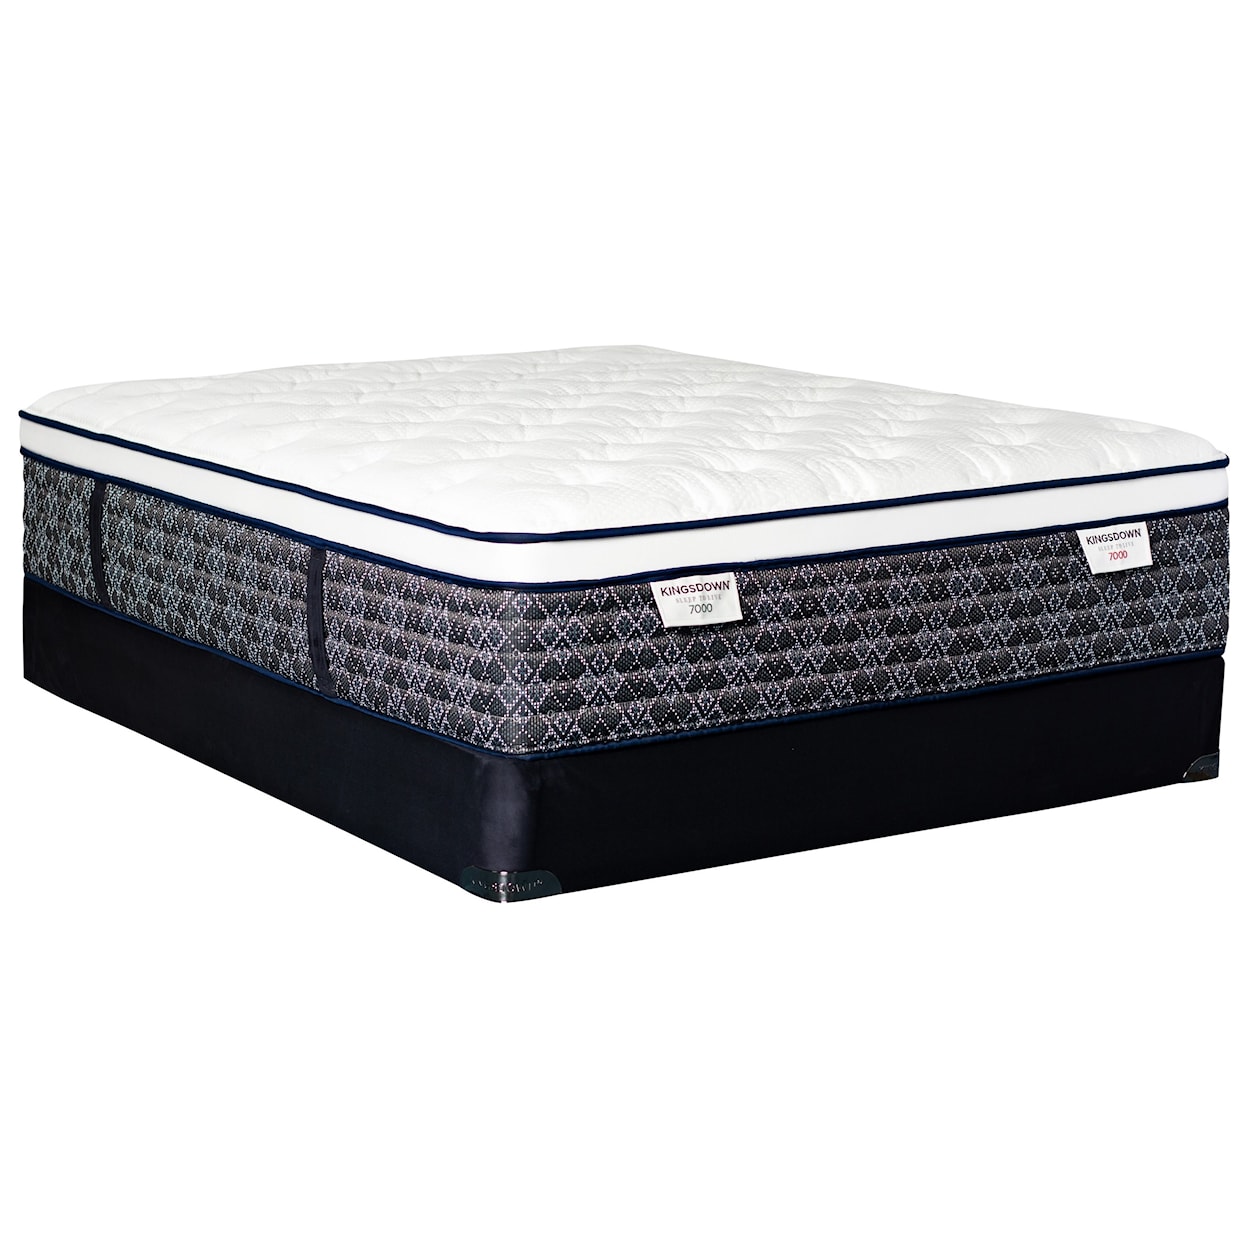 Kingsdown Sleep to Live 7000 Green Red ET Queen Pocketed Coil Mattress LoPro Set